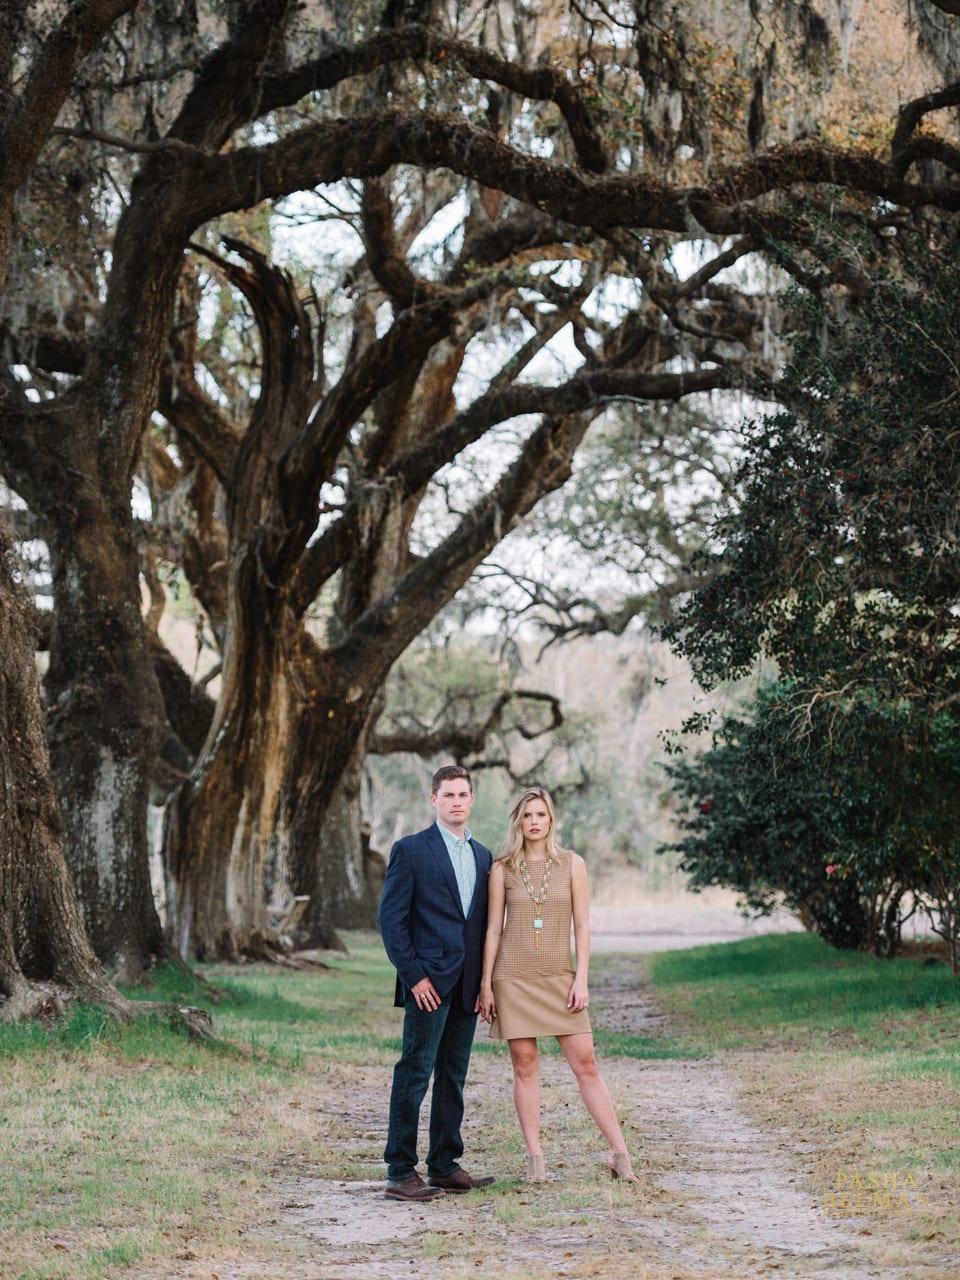 Charleston Plantation Engagement Pictures | Engagement Photography by Pasha Belman in South Carolina 